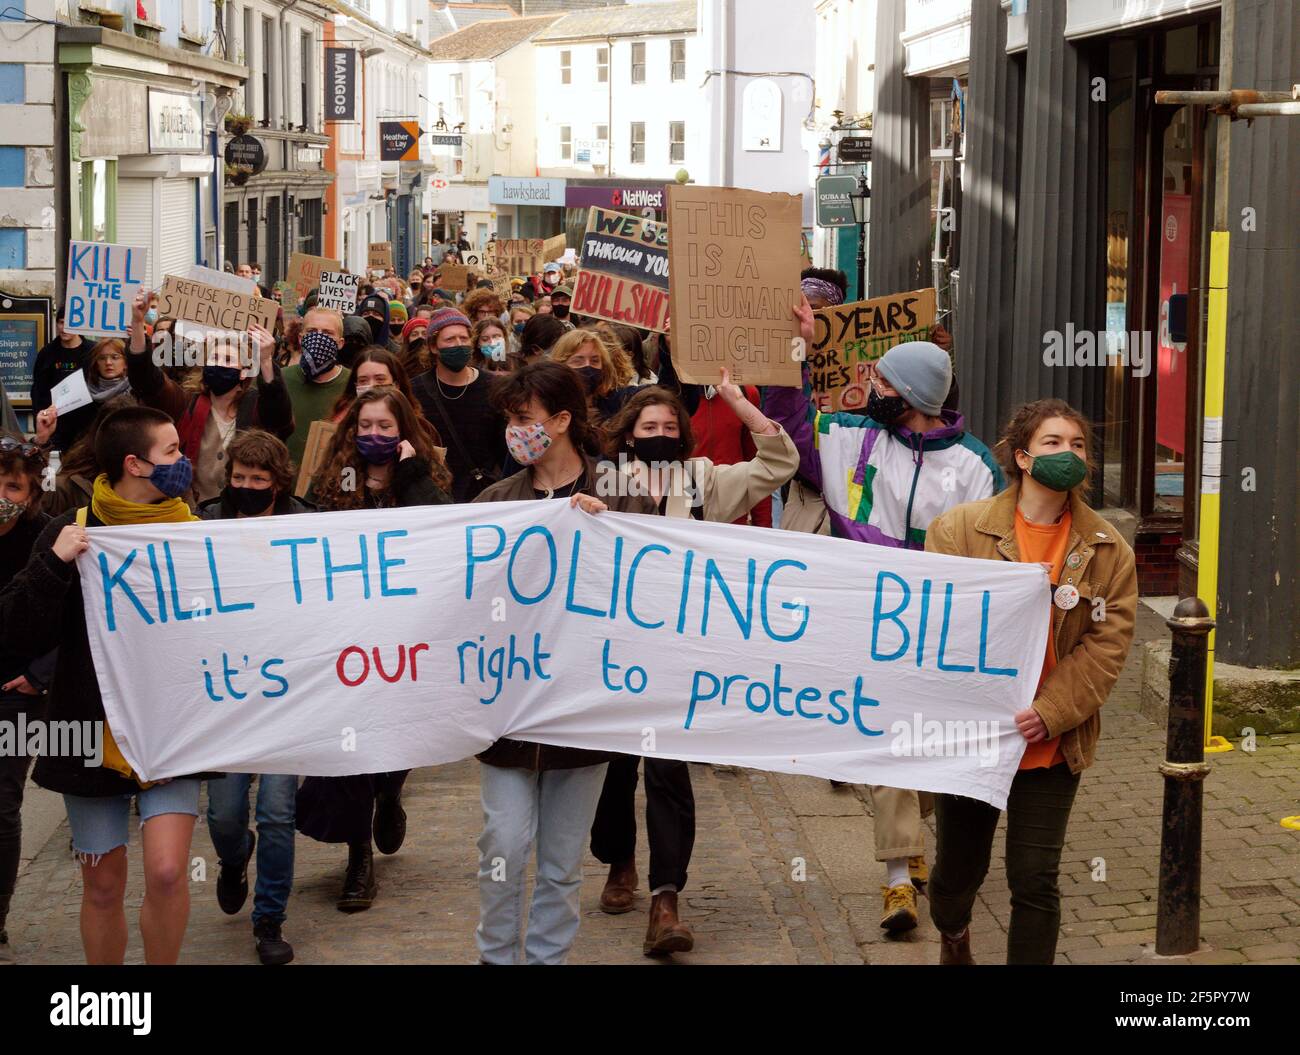 A Kill the bill demonstration and March involving several hundred protesters happens at The Moor square in Falmouth, After speakers finished, a march 1.5 miles through the center of town to Discovery Quay took place for further speeches. The protest in breach of Covid rules was policed at a distance by Devon and Cornwall officers. The proposed Police, crime and sentencing and courts bill could cause serious limitations to protesters deemed to be causing serious disruption. Falmouth. Cornwall, England, 27th March 2021, Credit: Robert Taylor/Alamy Live News Stock Photo